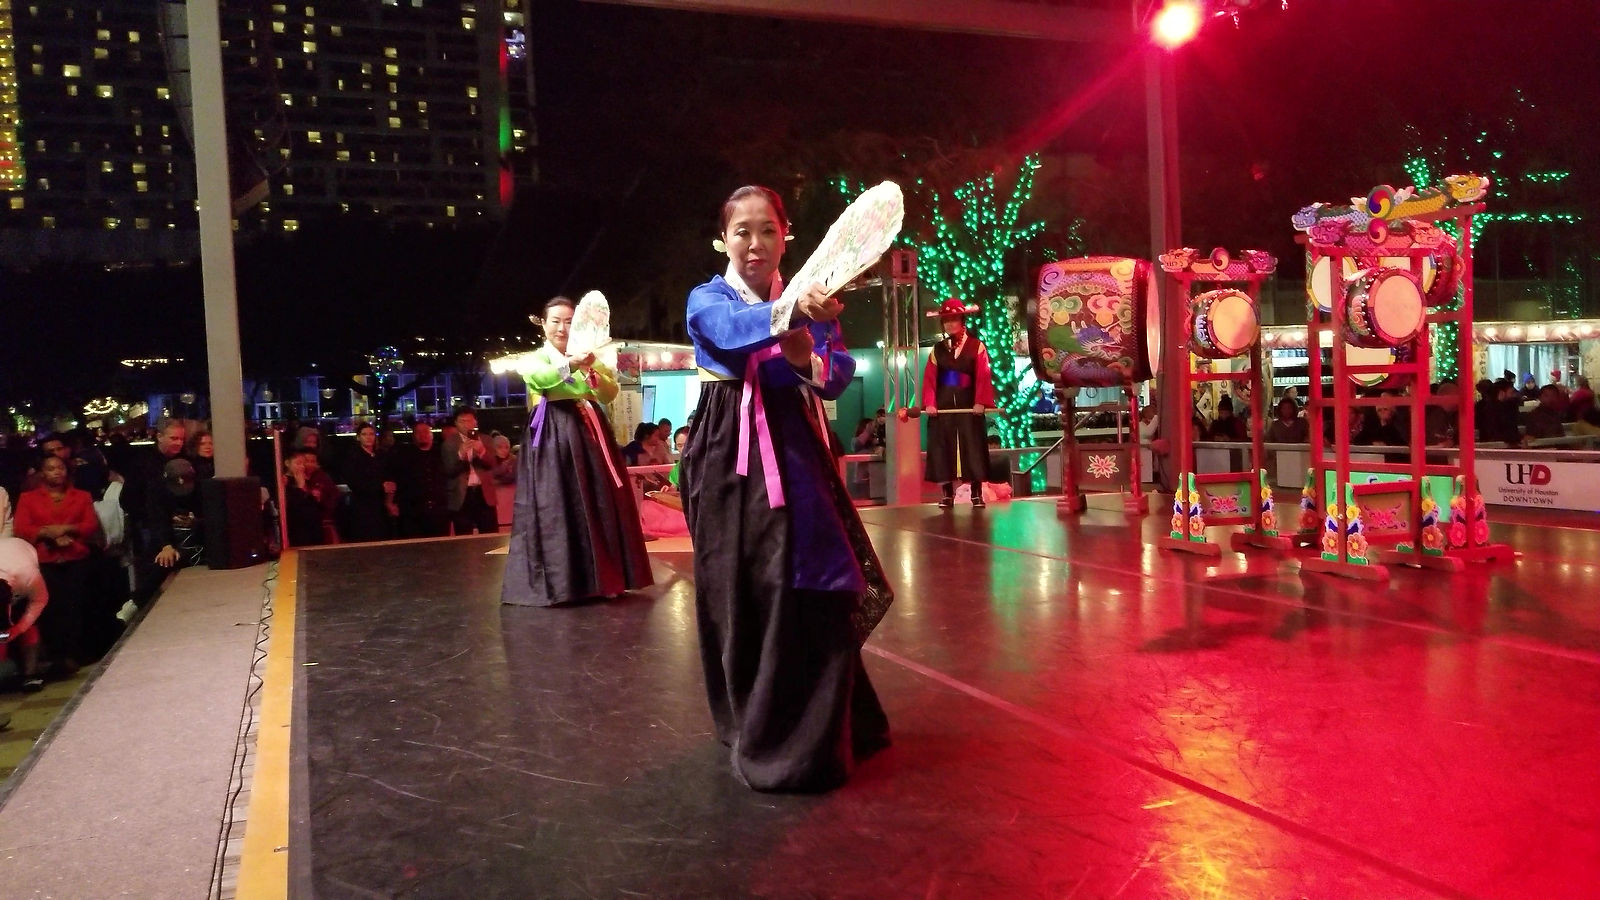 15 th Annual Celebration of Dance Discovery Green 12-15-2018